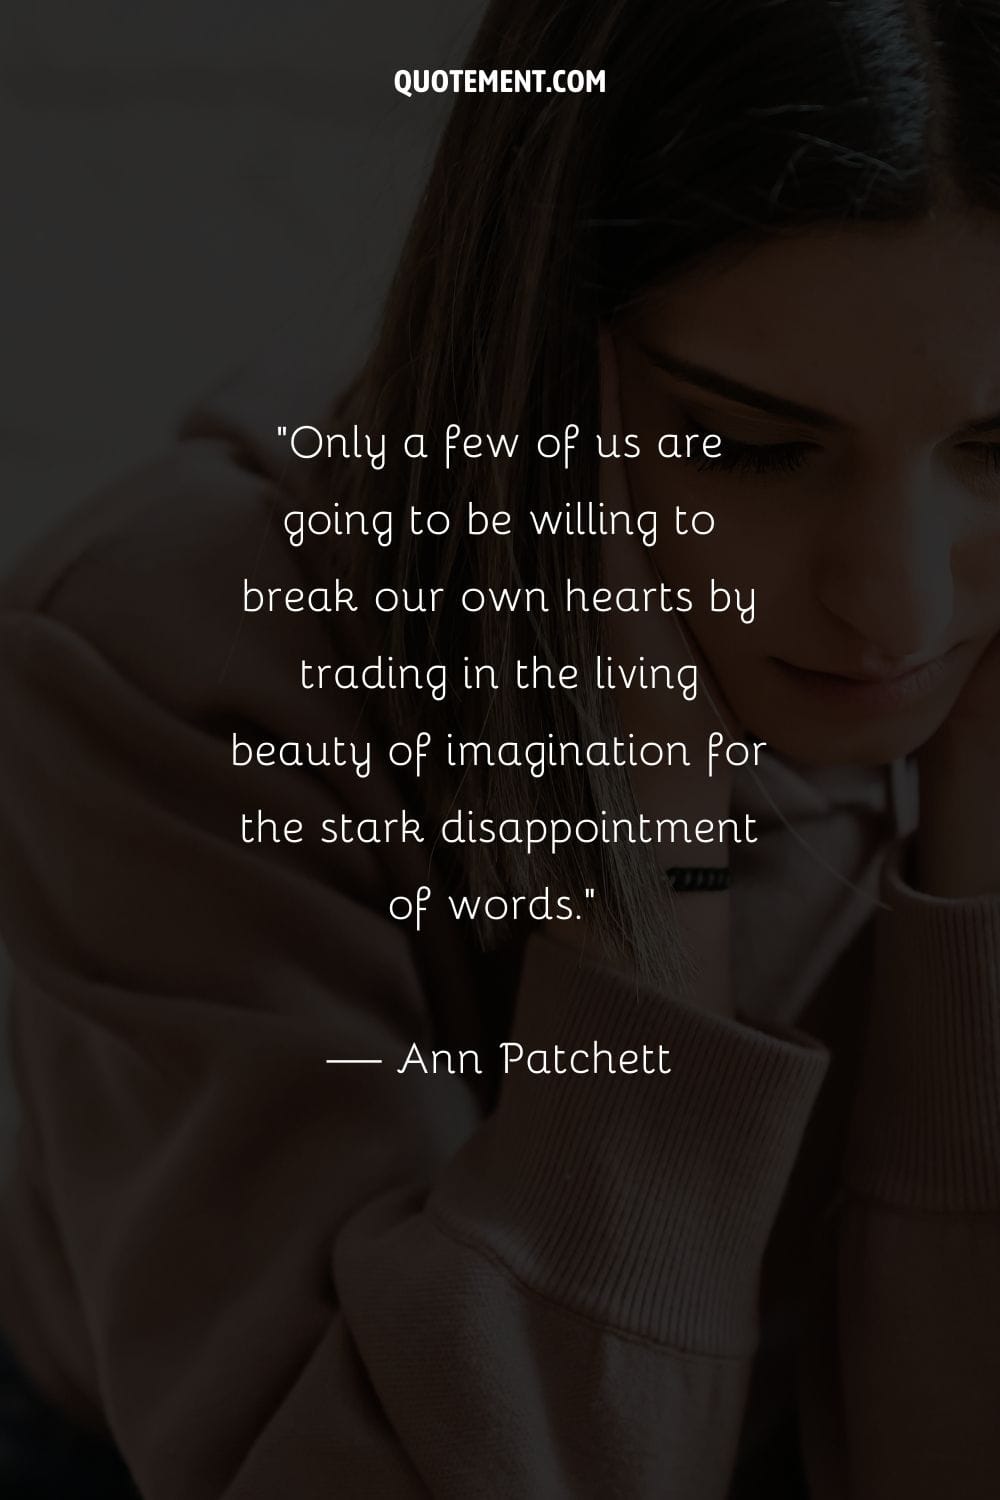 Only a few of us are going to be willing to break our own hearts by trading in the living beauty of imagination for the stark disappointment of words